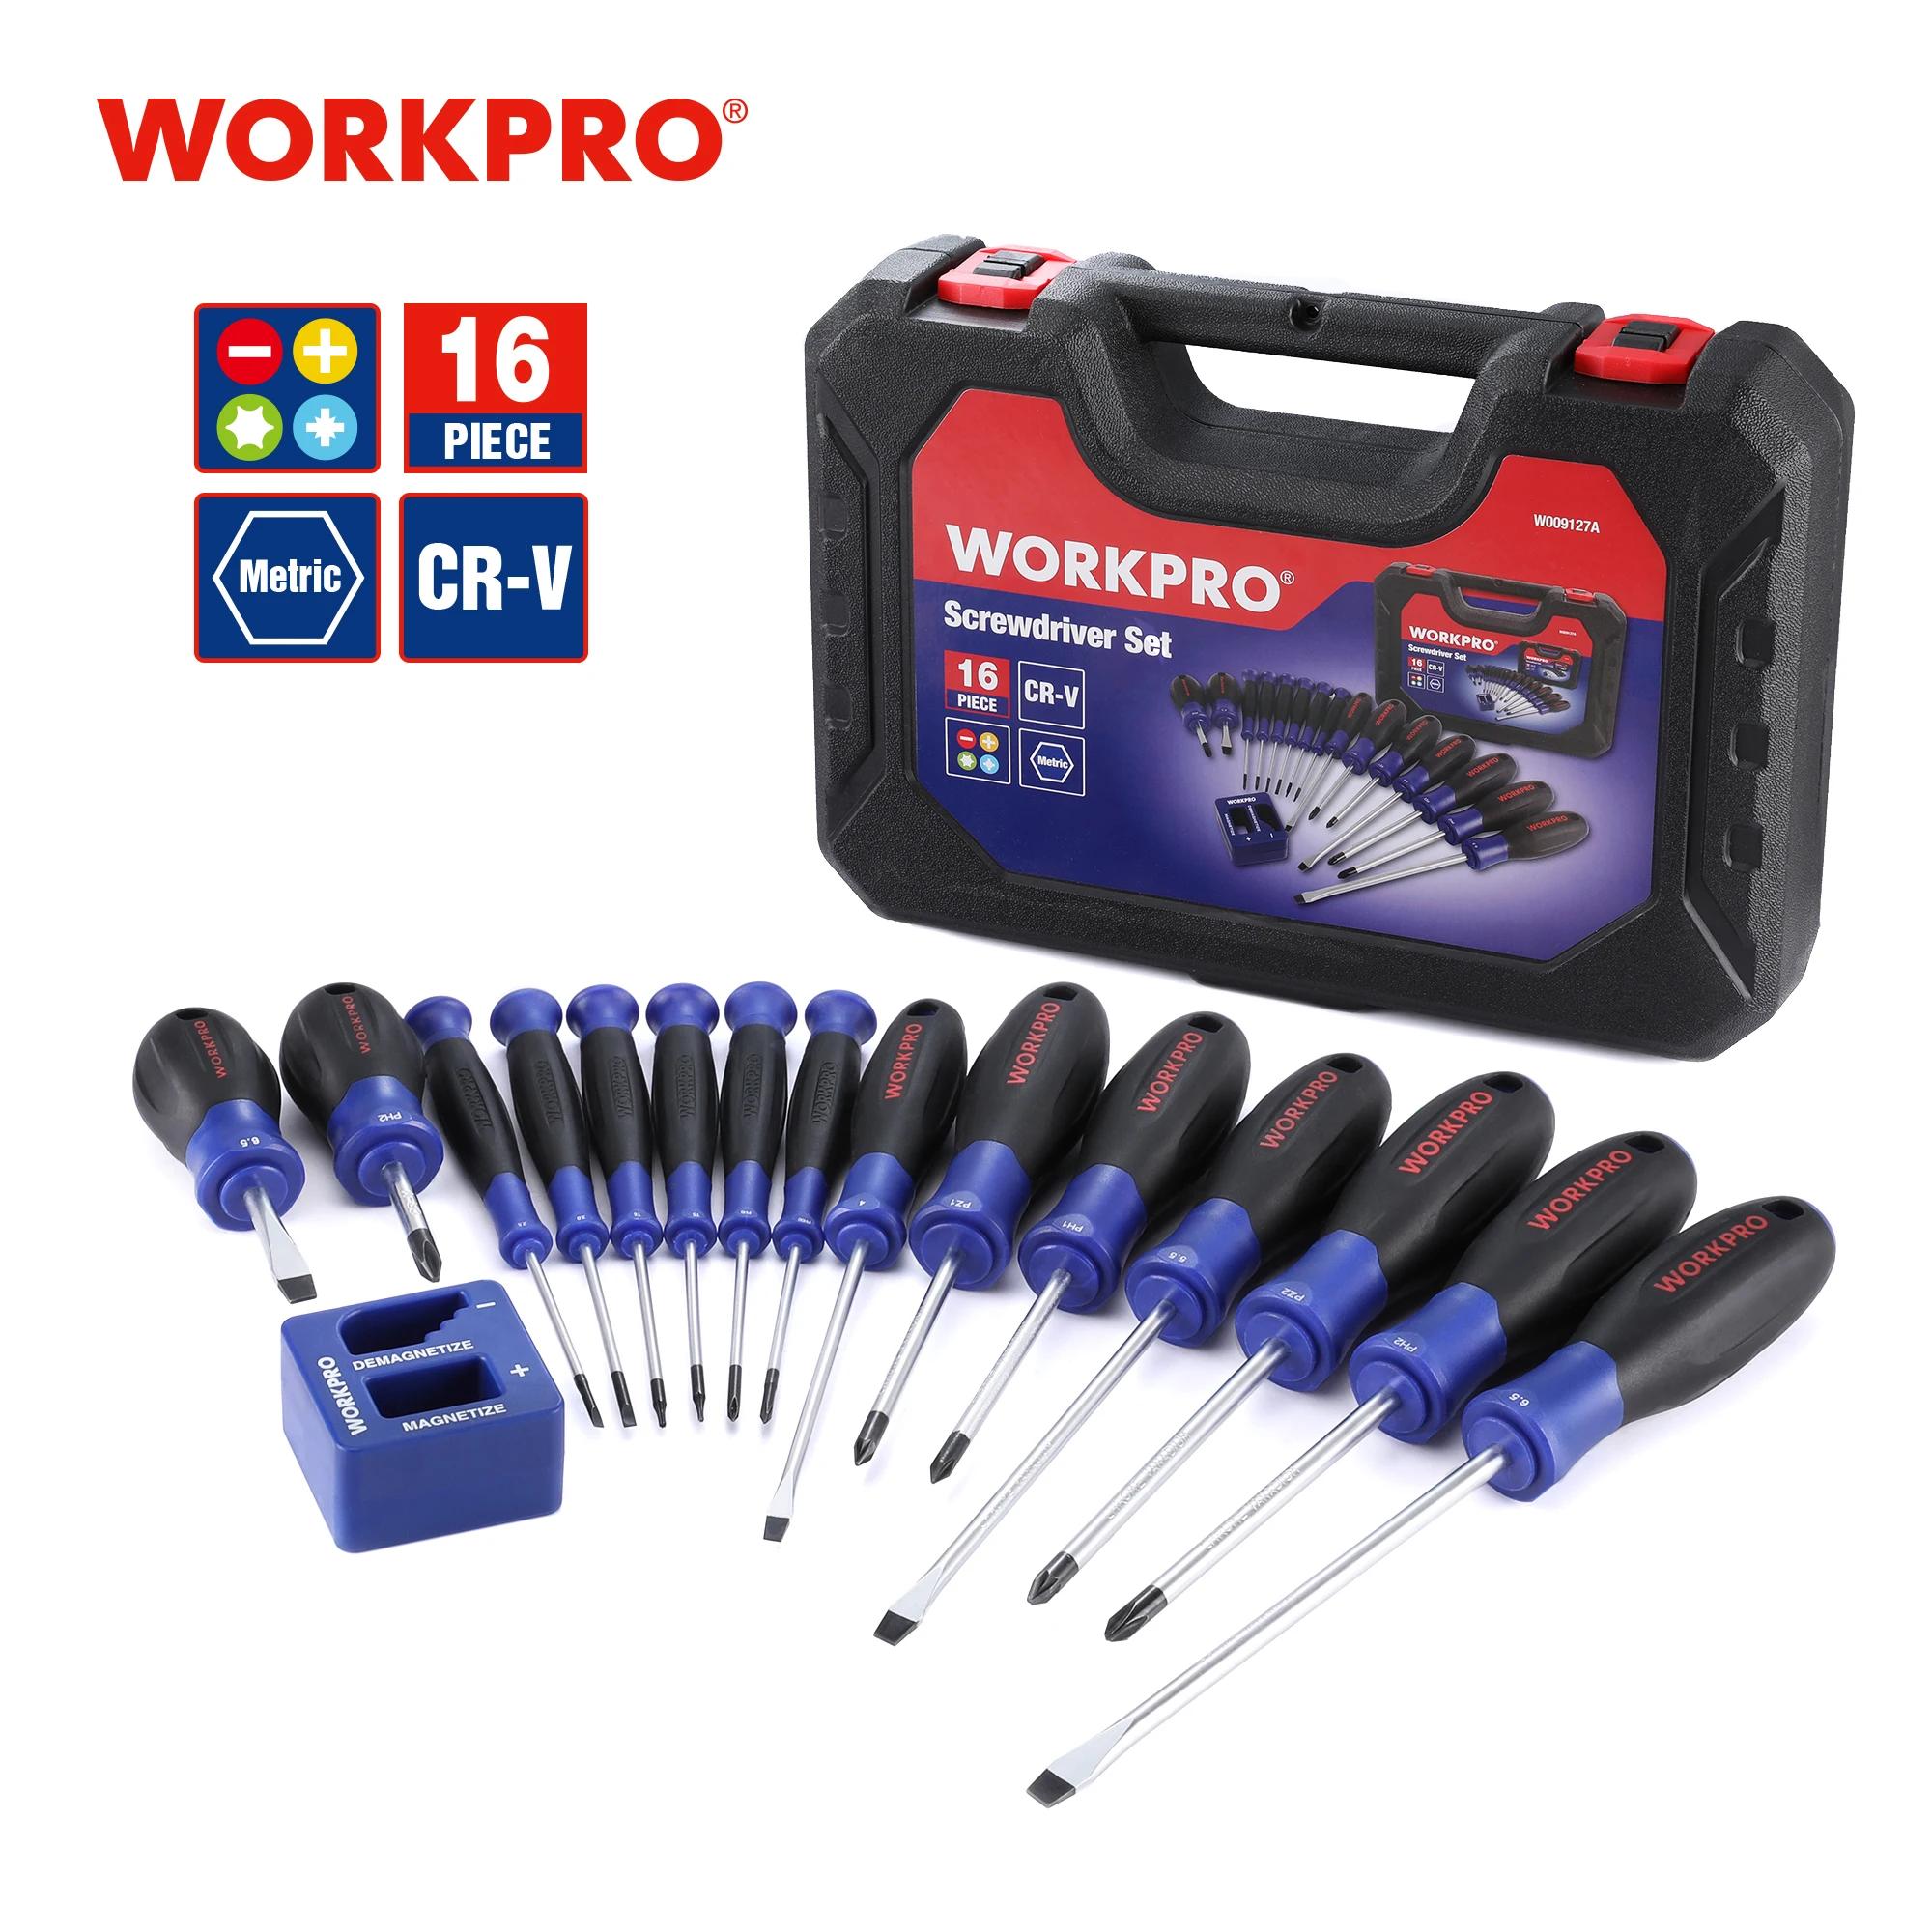 WORKPRO 16PC ڱ ũ ̹ Ʈ Phillips Slotted Pozi  Pricision Screwdriver Set For Fix Repair DIY With Durable Case